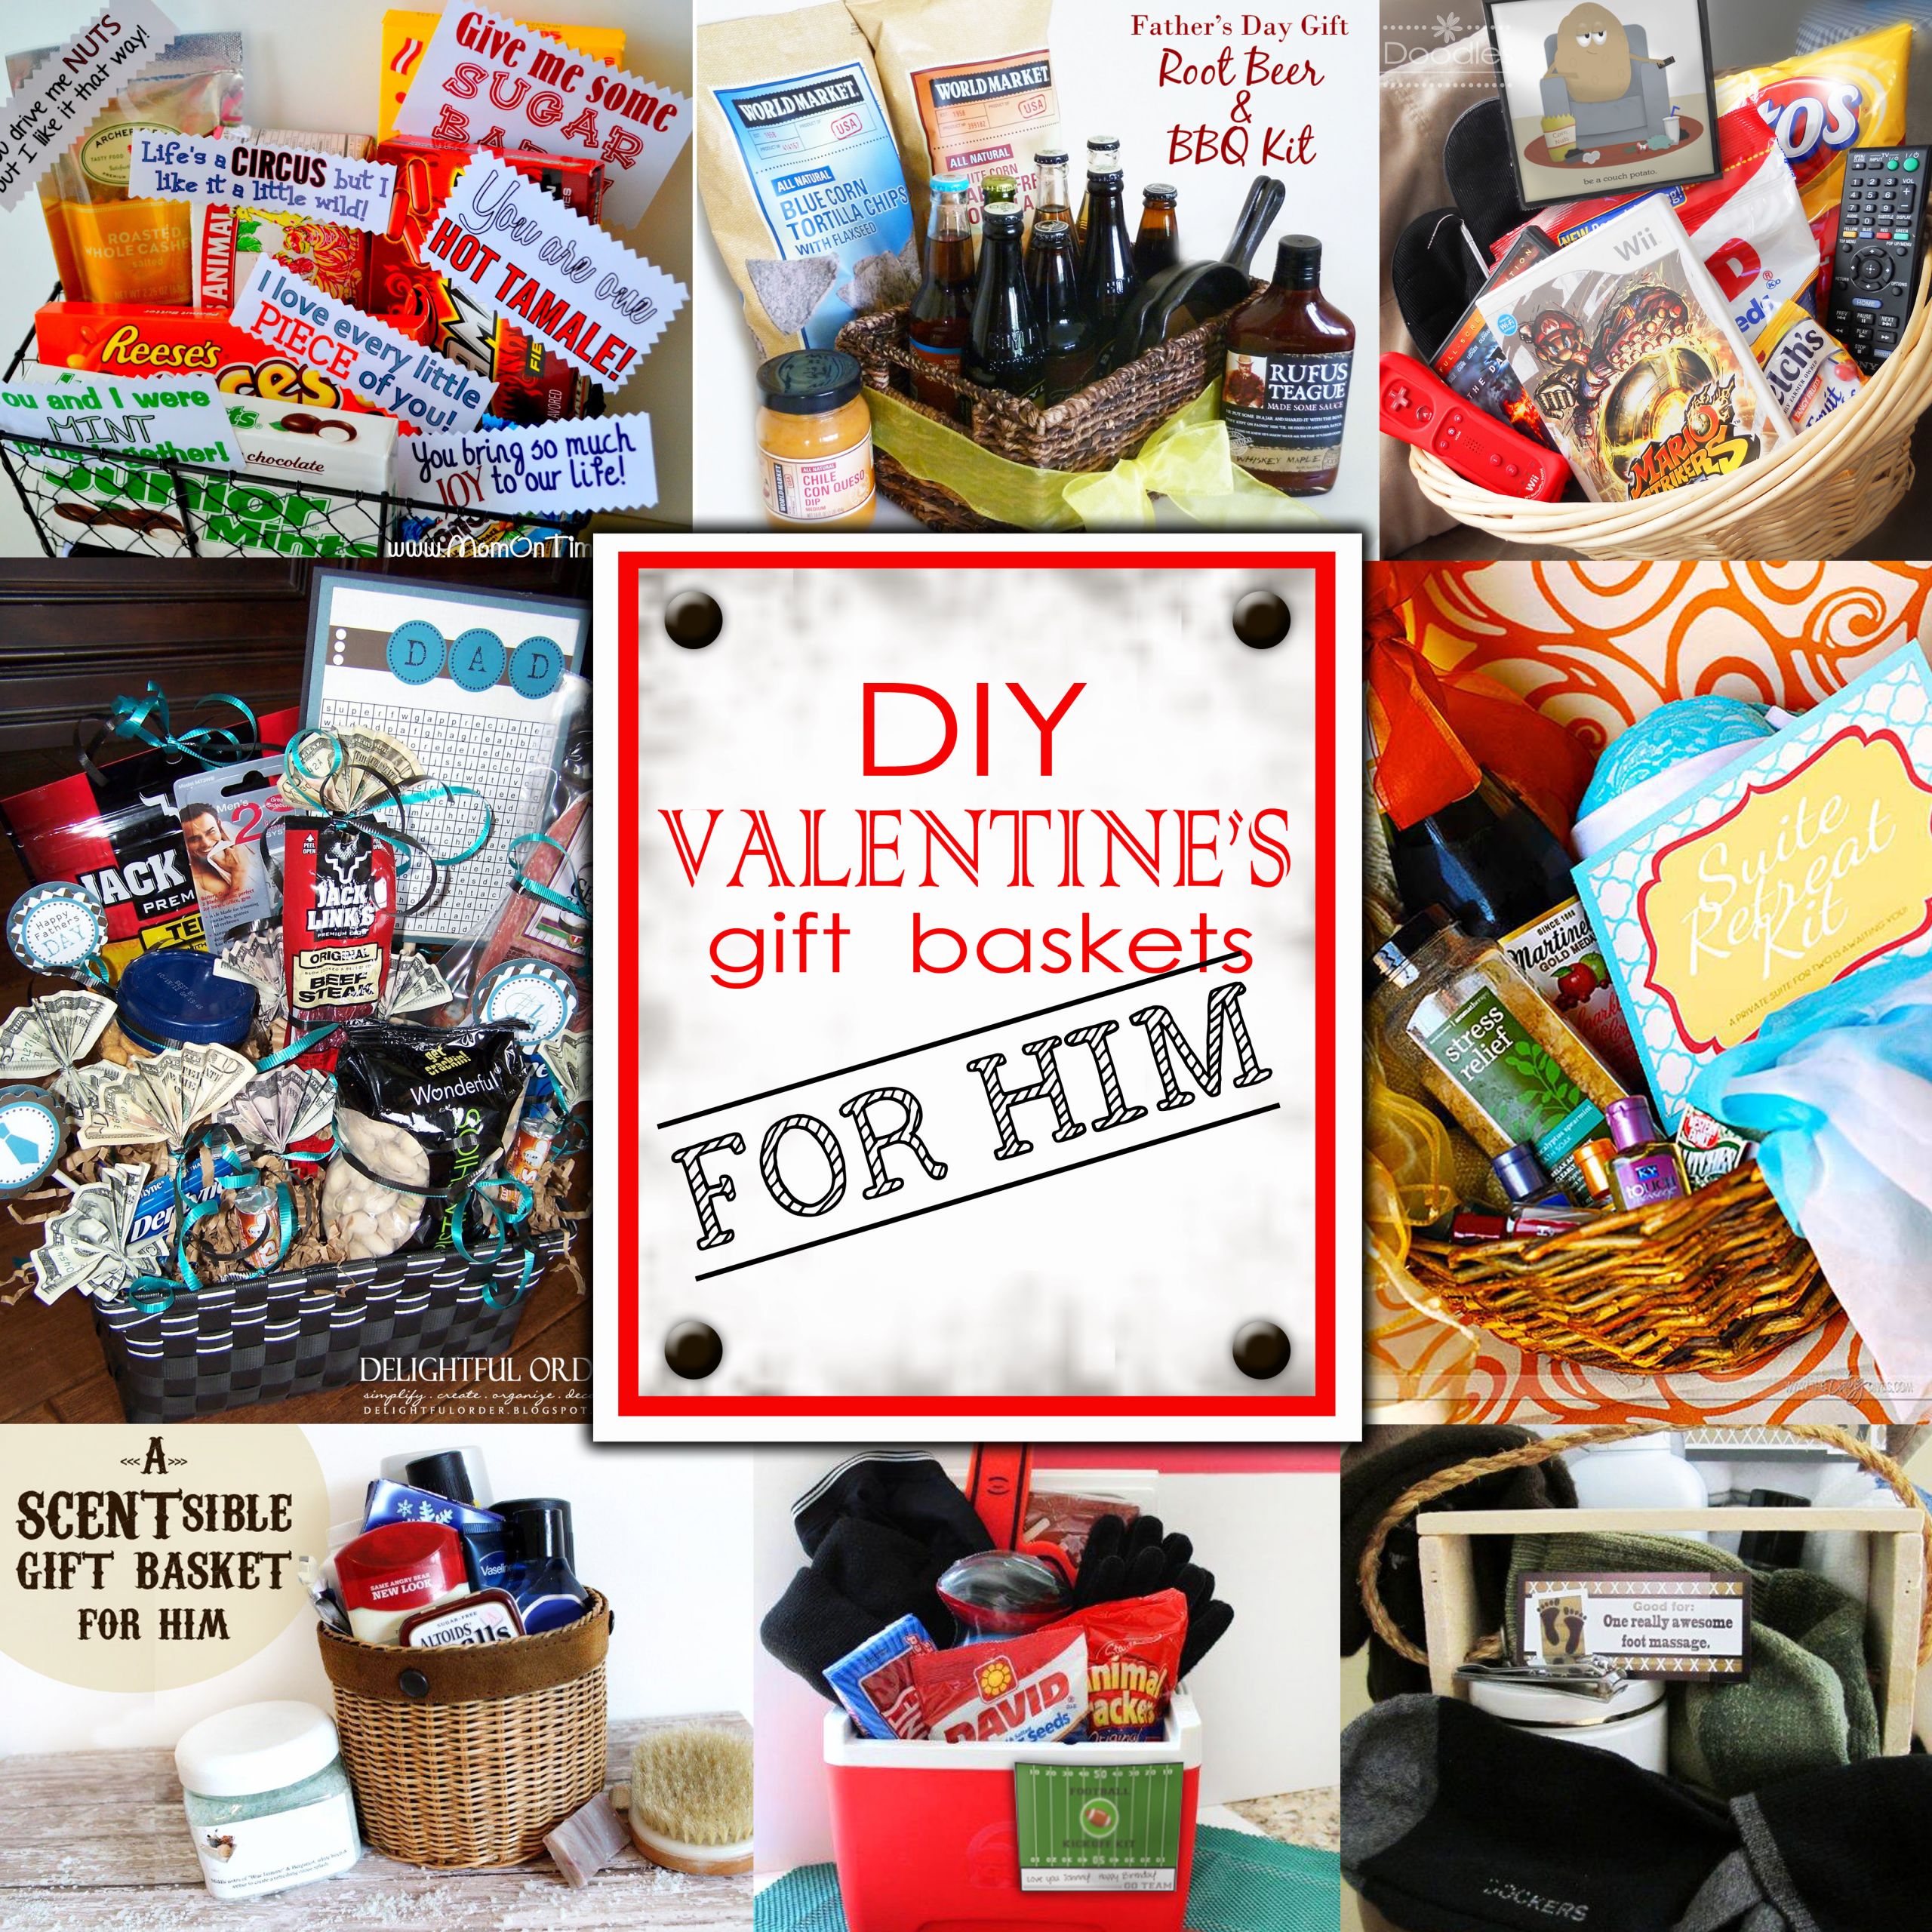 Ideas for Valentines Day for Him Unique Diy Valentine S Day Gift Baskets for Him Darling Doodles